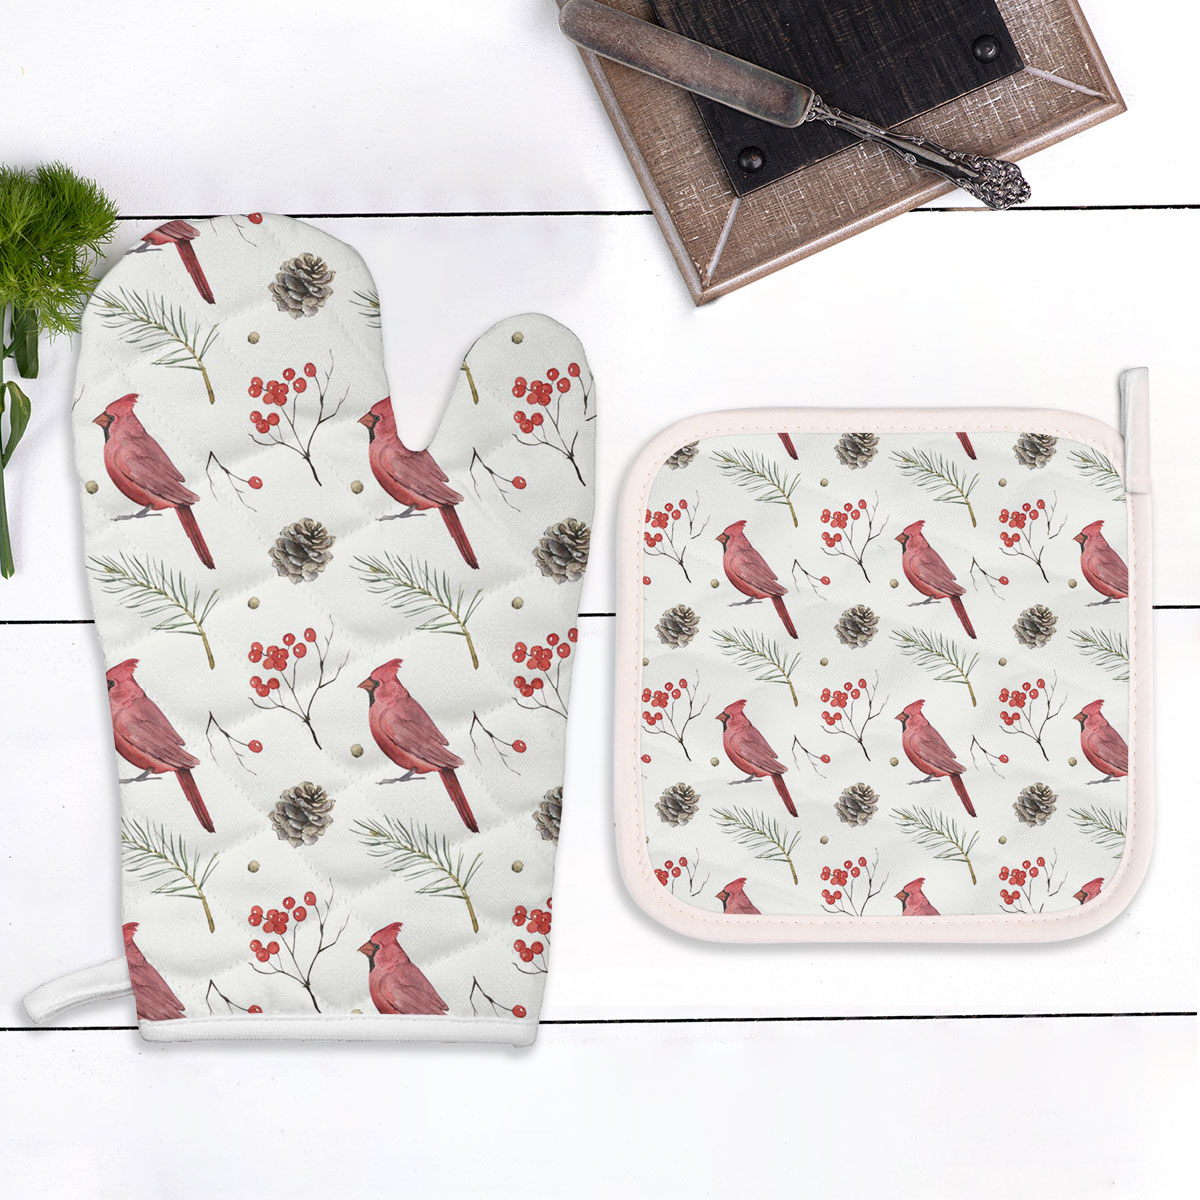 Berries Red Cardinal Oven Mitts Pot Holder Set